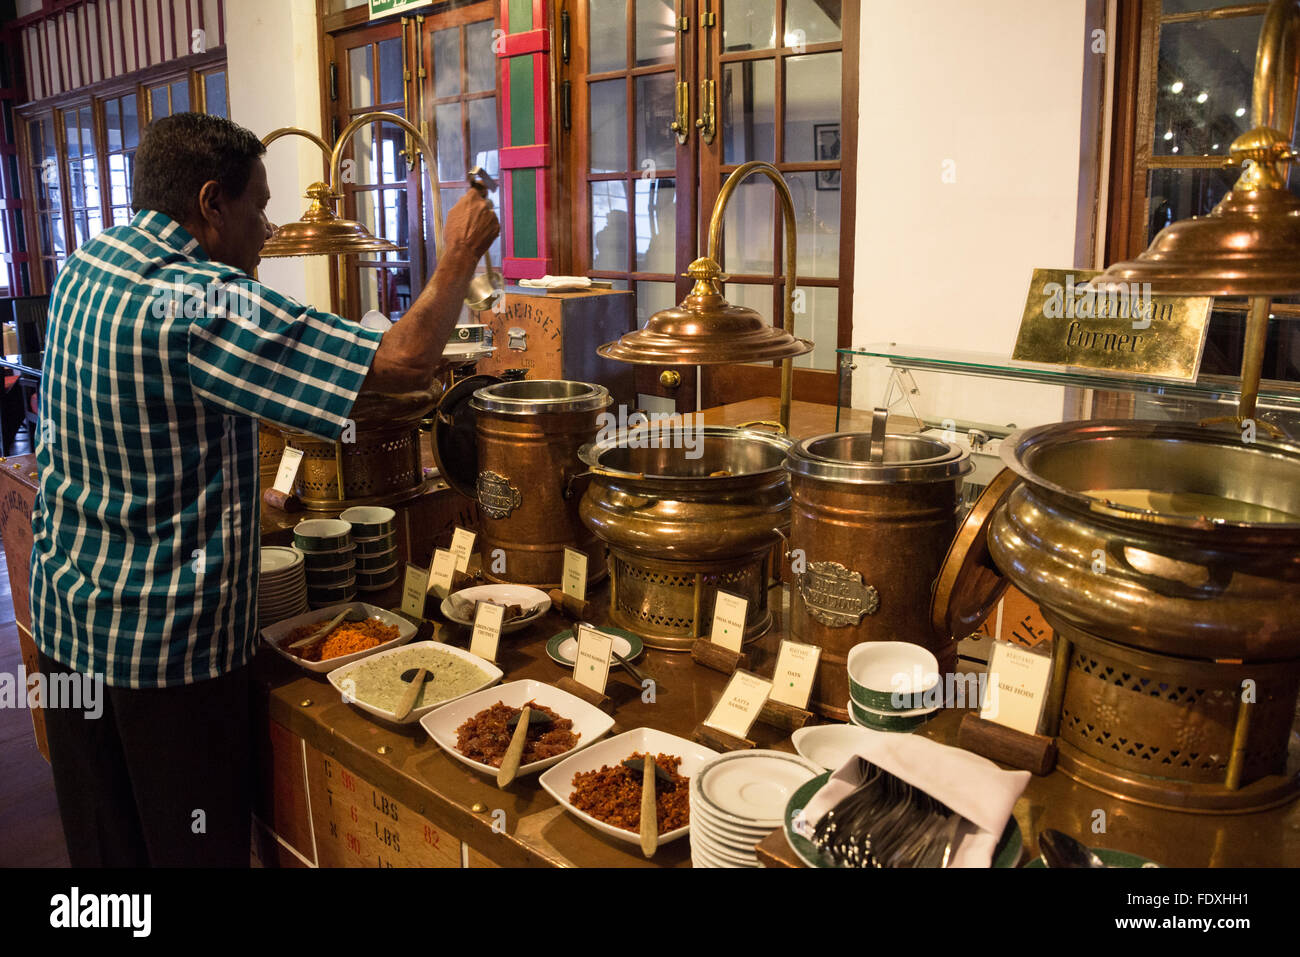 A hotel guest helps himself to one of the Sri Lankan curries in the restaurant at  the 4-star Heritance Tea Factory hotel above Stock Photo